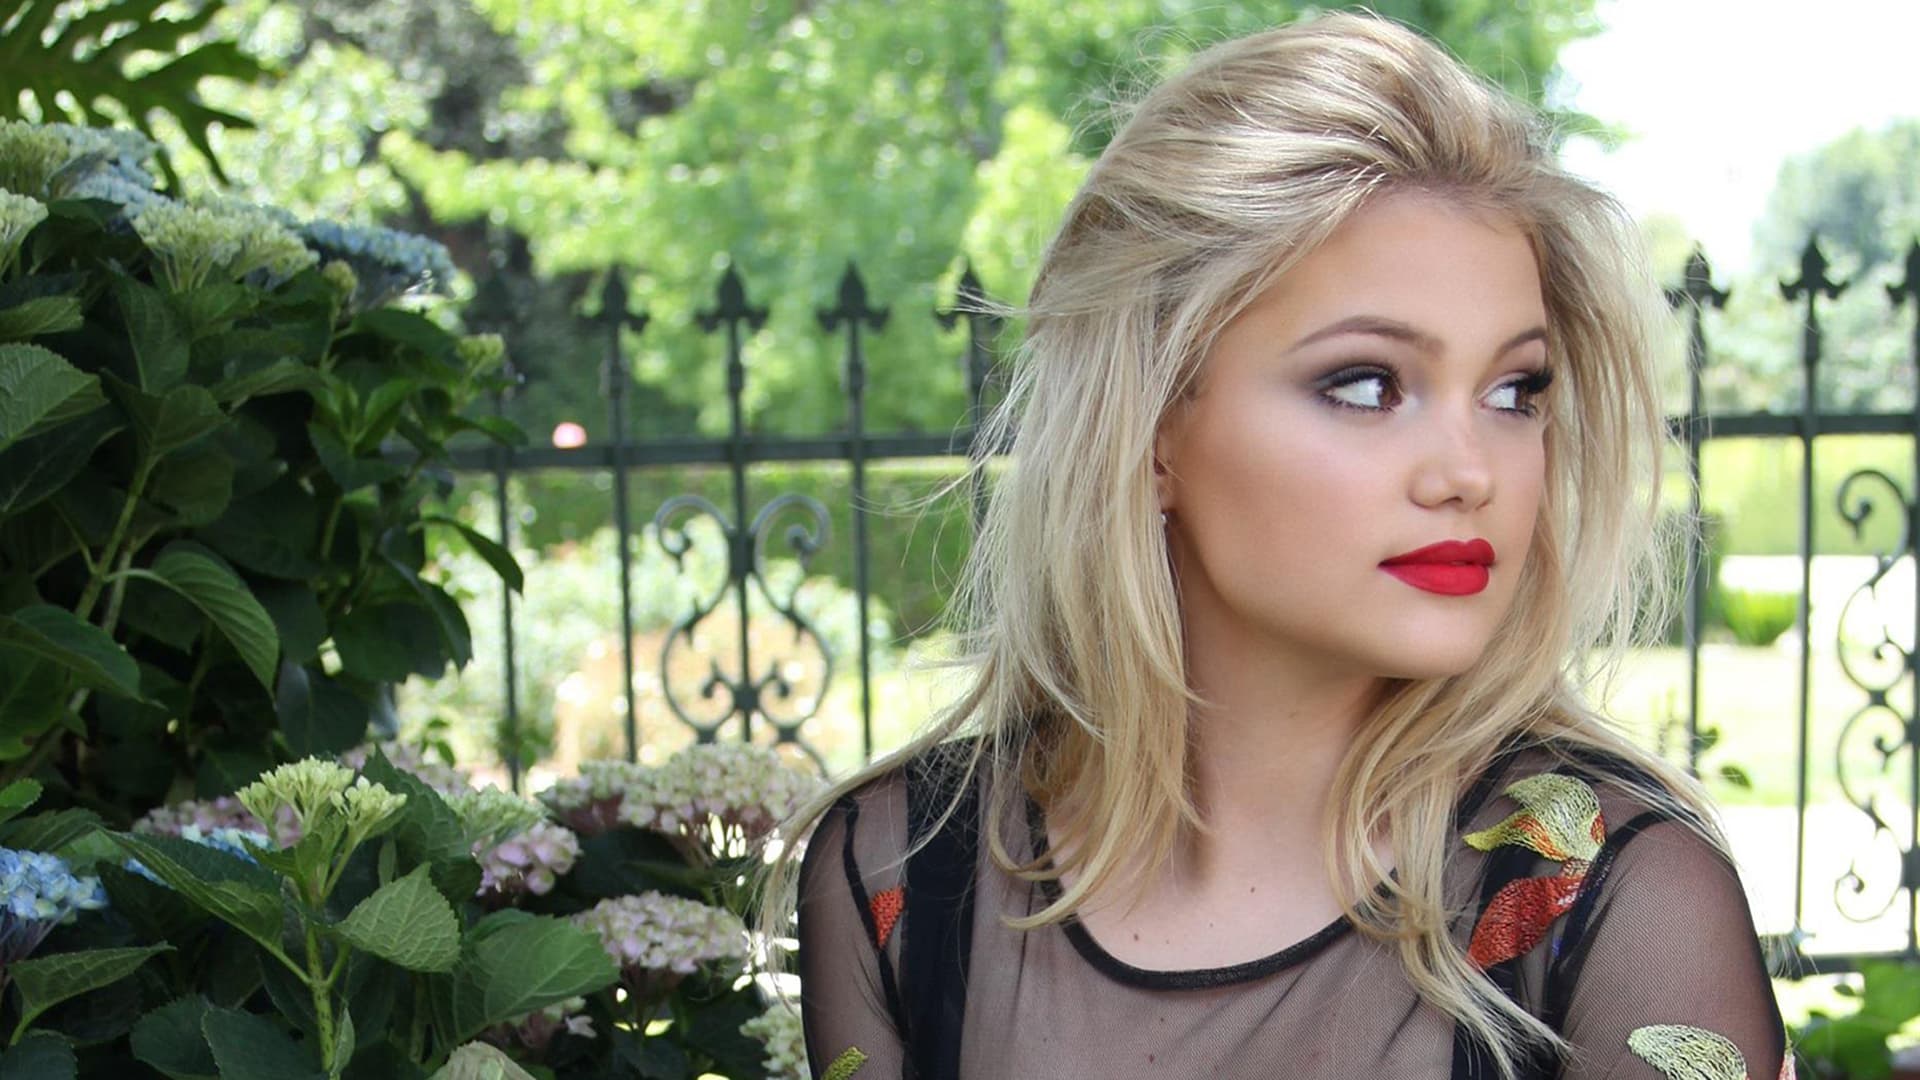 Olivia Holt Wallpapers Pictures 55248 1920x1080 px HDWallSource.